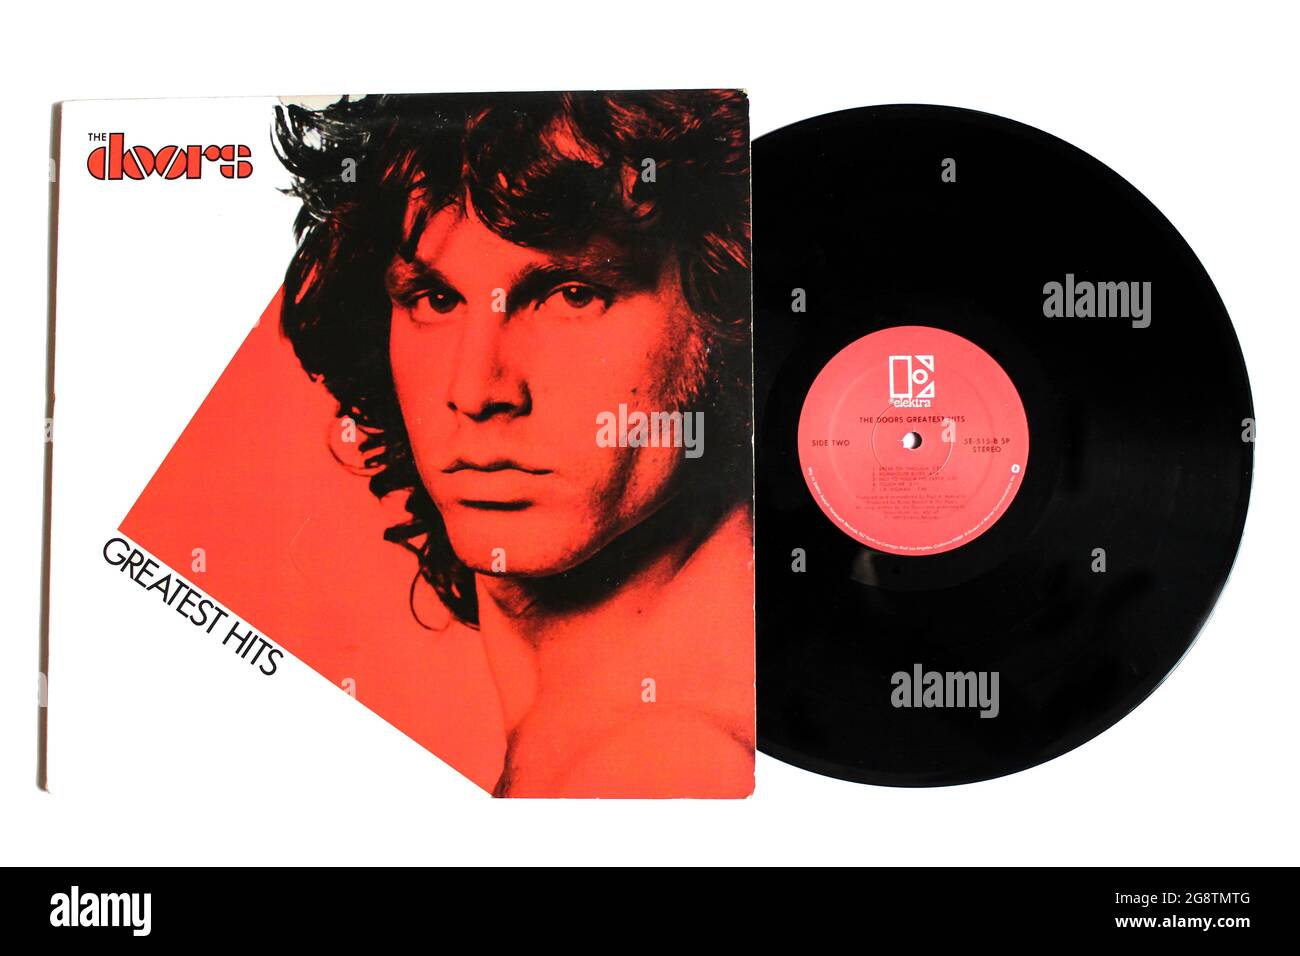 Rock band, The Doors music album on vinyl record LP disc. Self Titled: The Doors Greatest Hits album cover Stock Photo